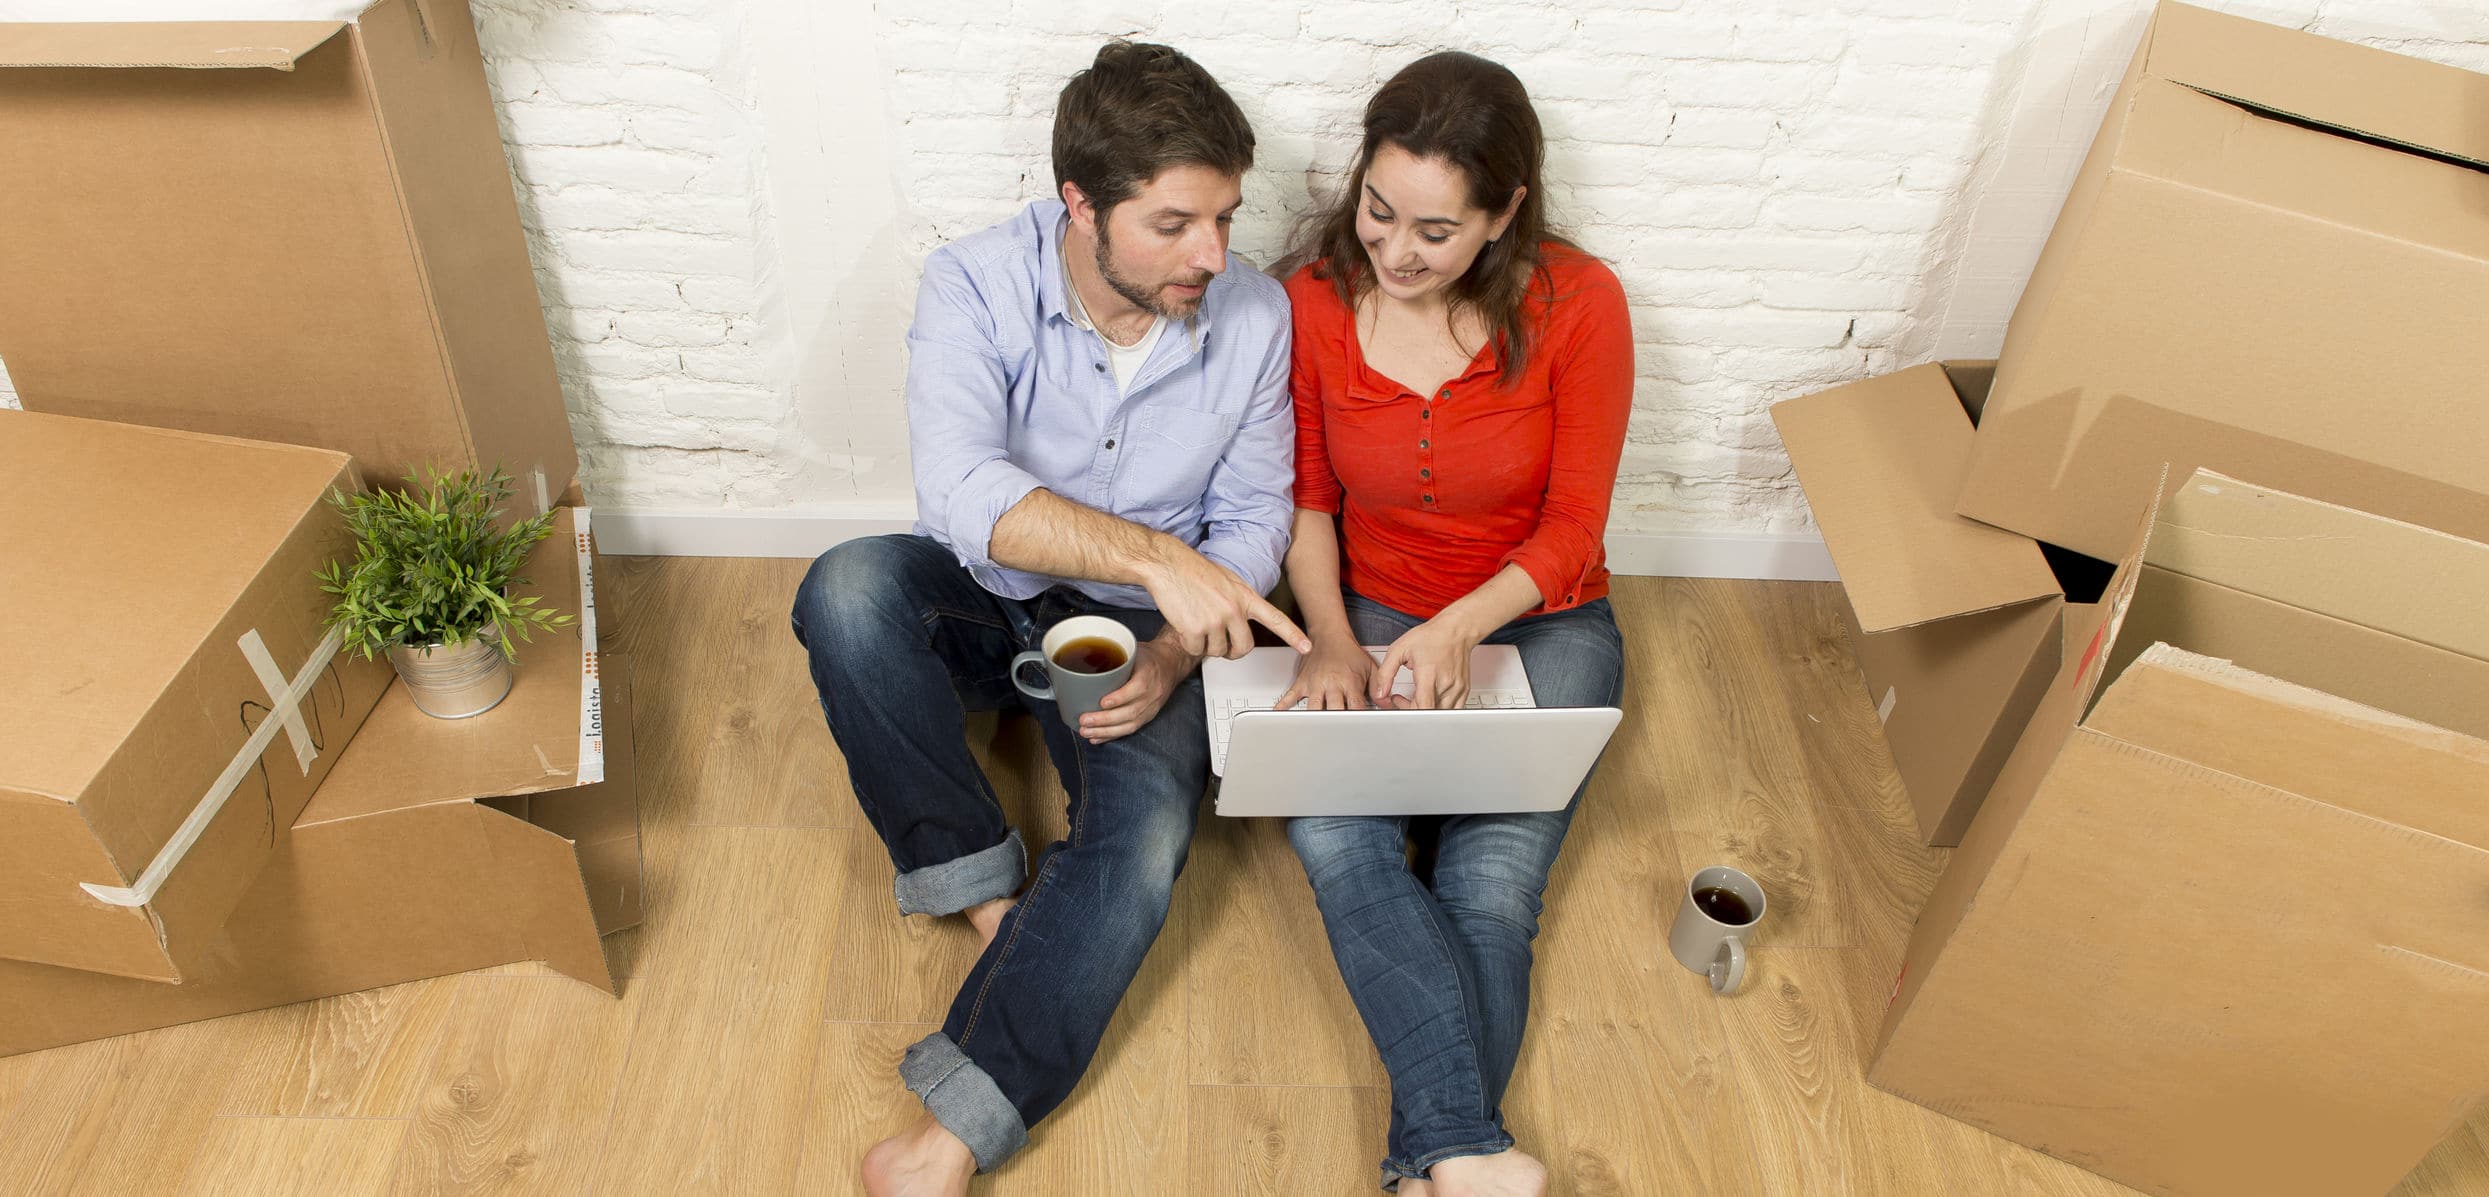 Couple on a laptop sitting by moving boxes